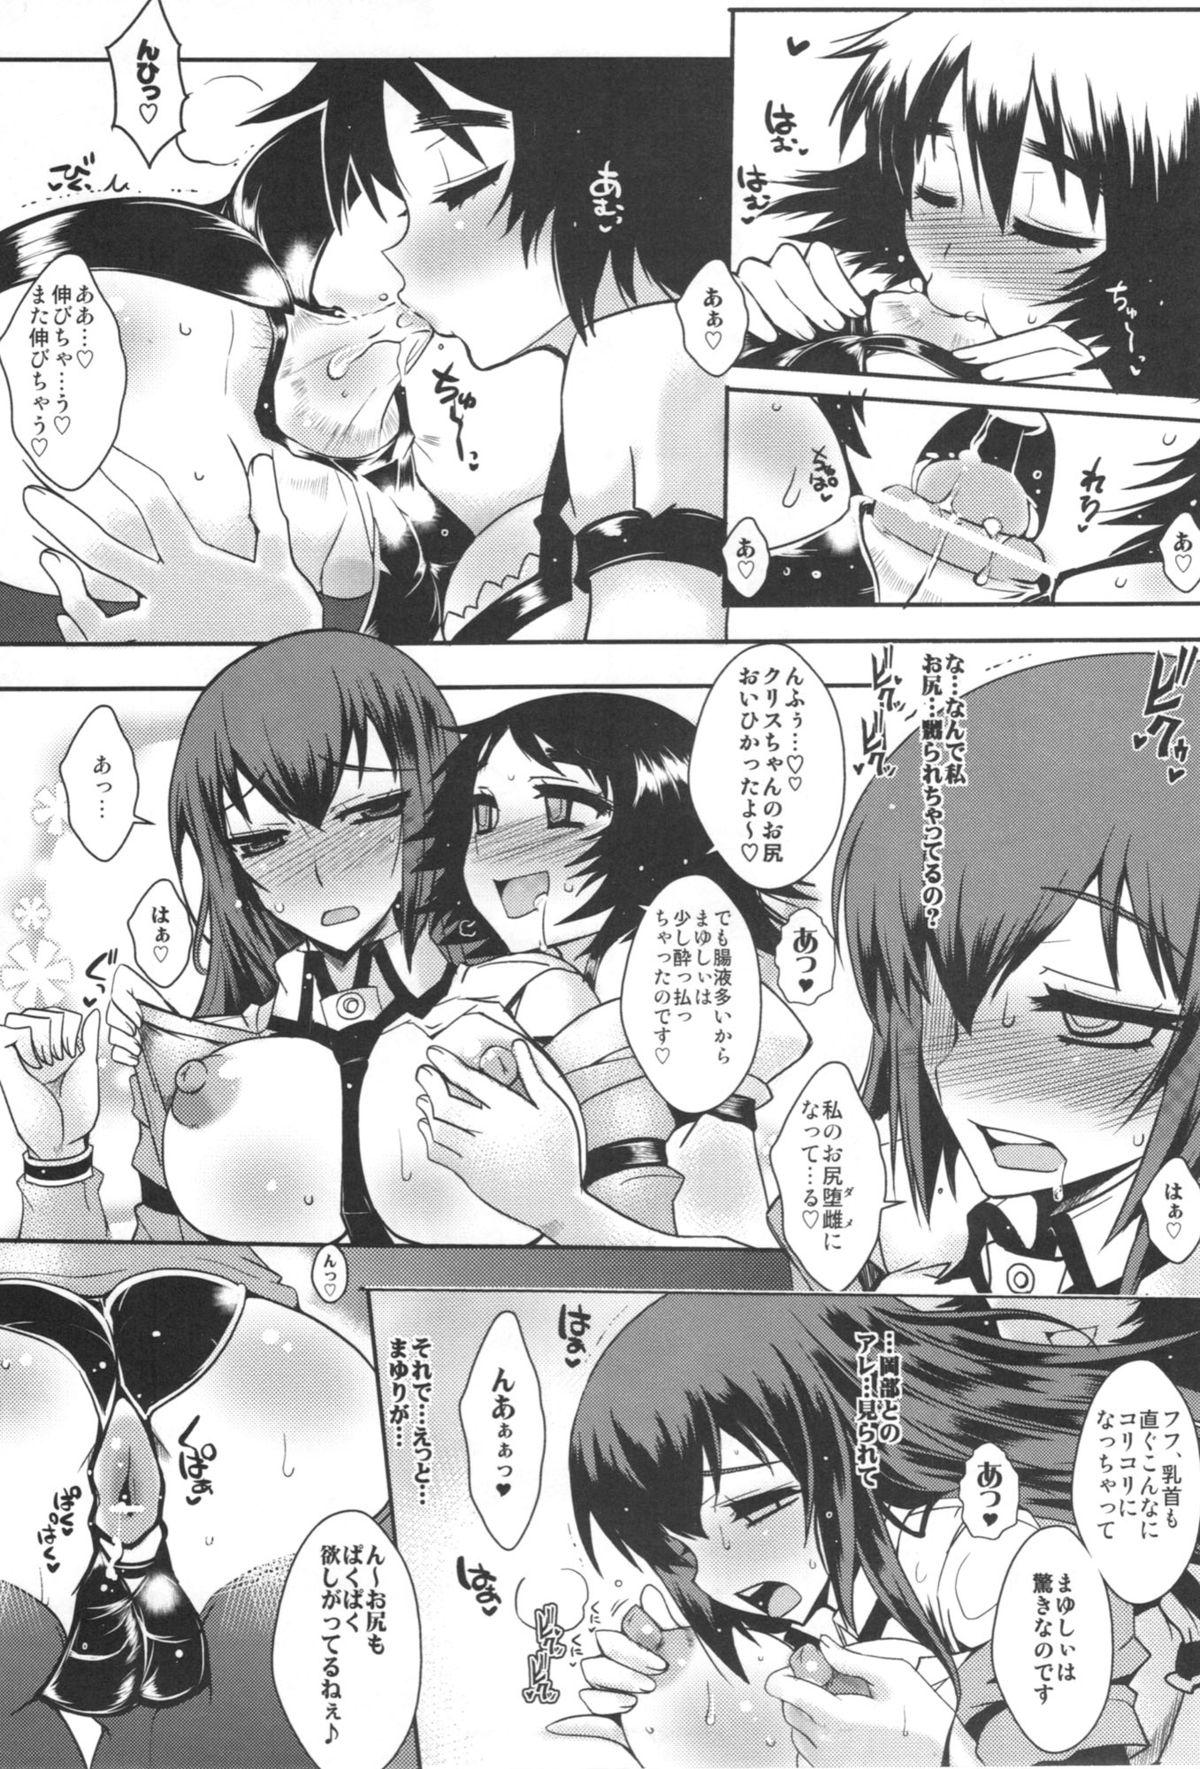 Pink Shirikan Aikou no Sodominists - Steinsgate Thief - Page 5